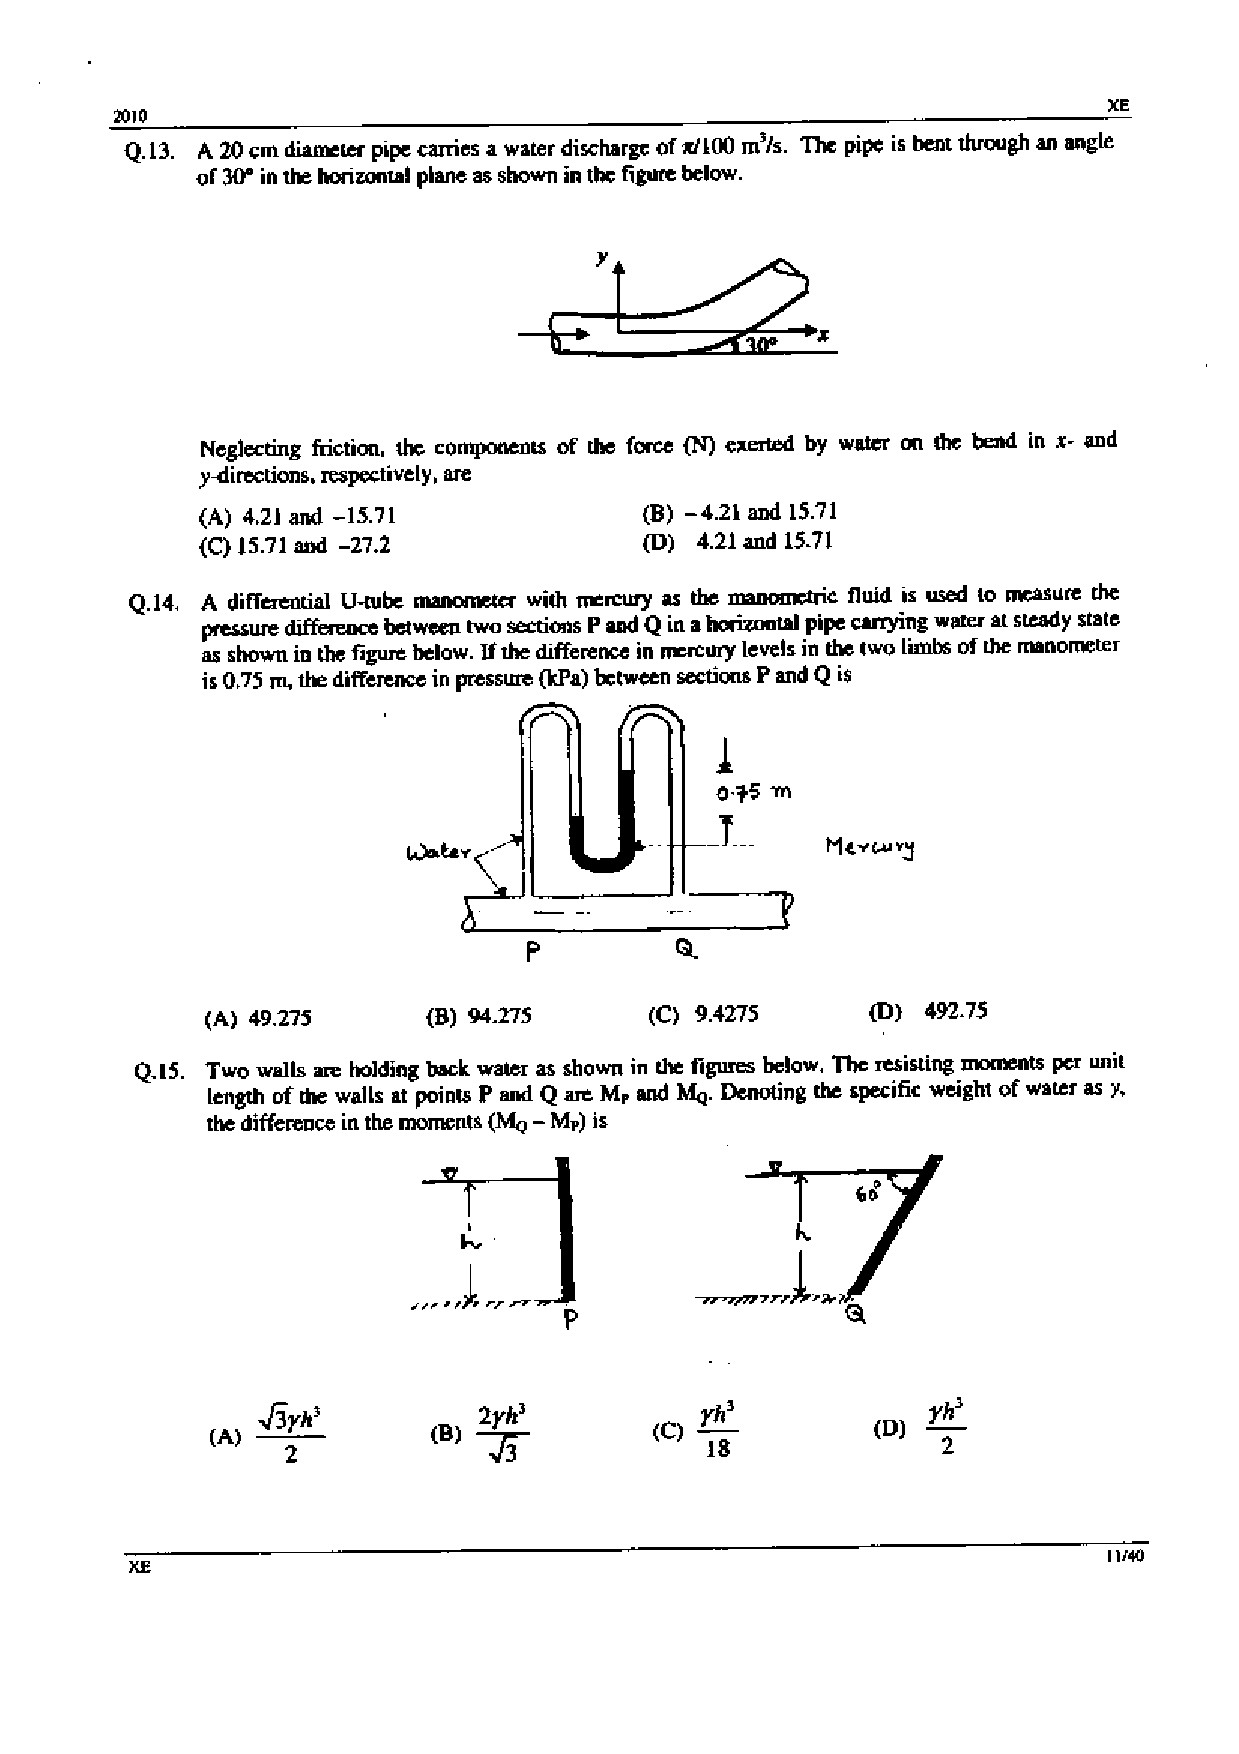 GATE Exam Question Paper 2010 Engineering Sciences 11